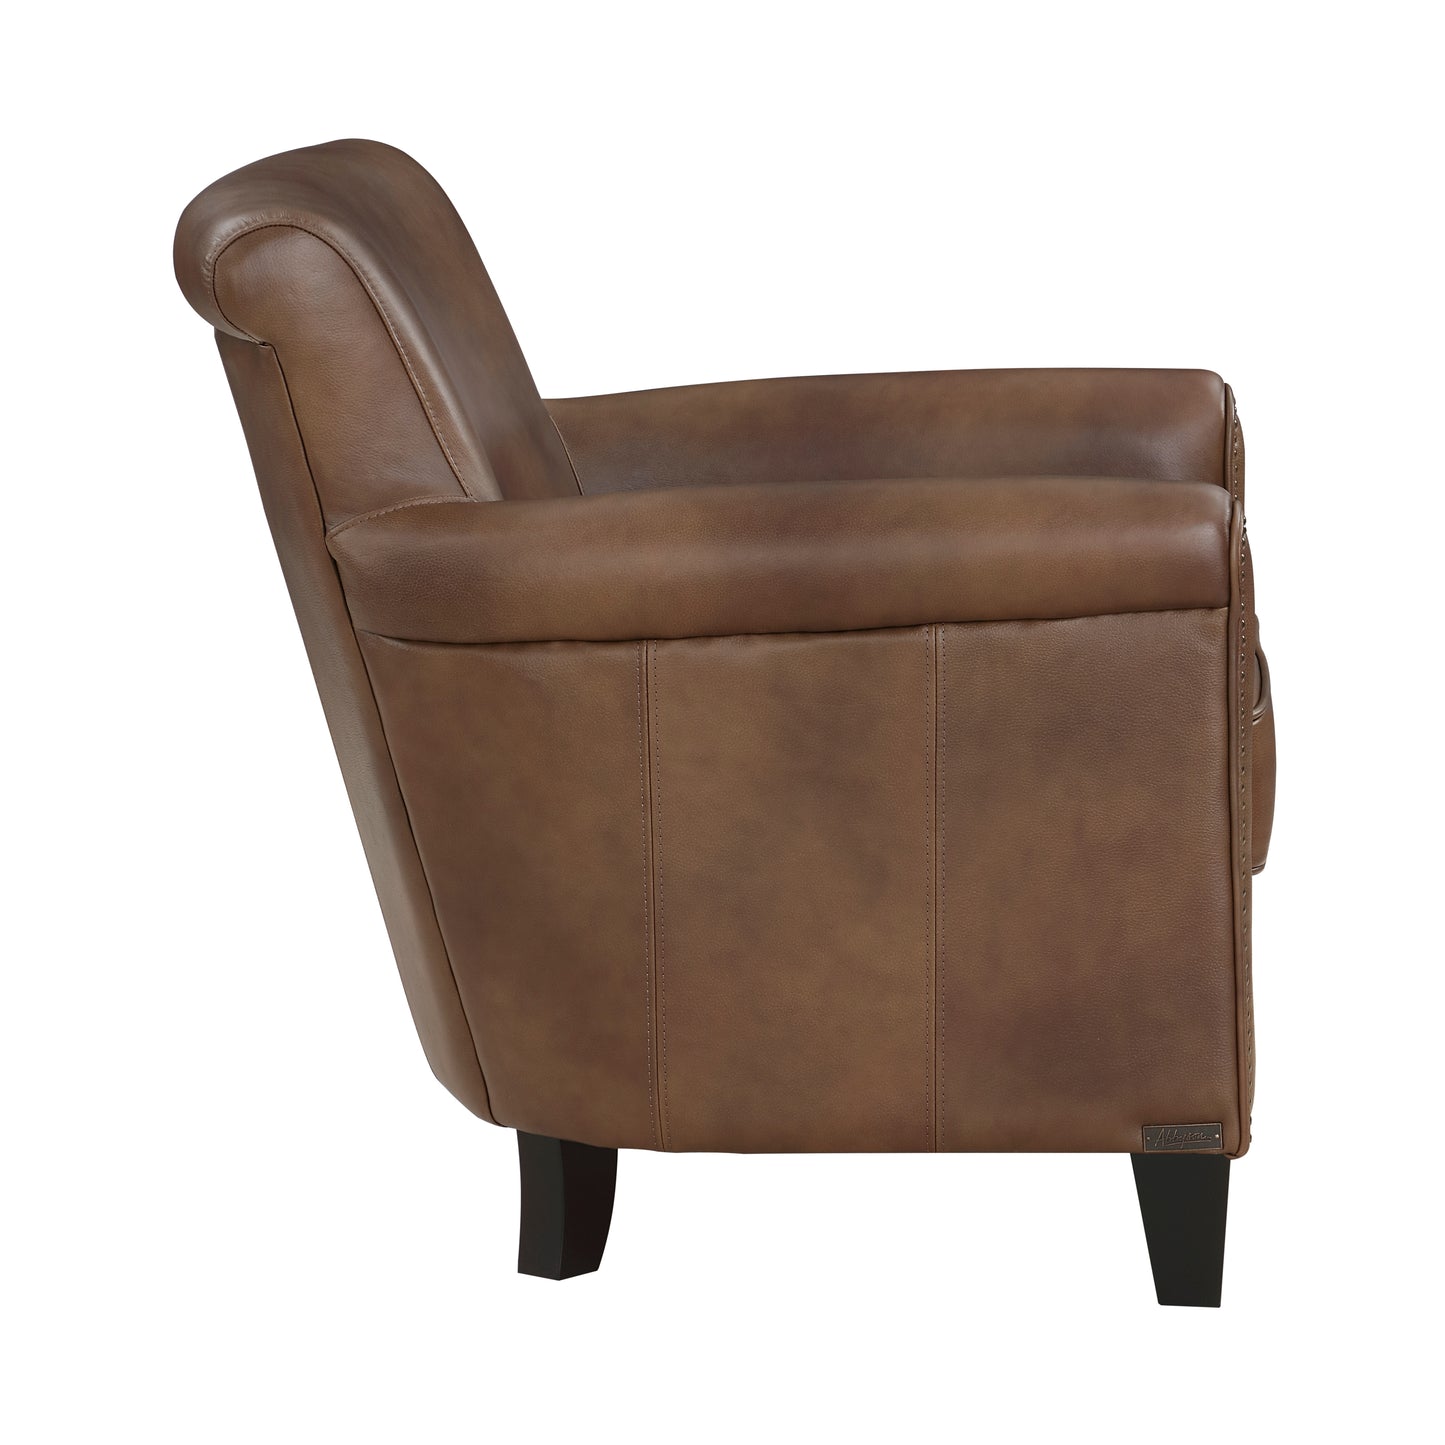 Braintree Top Grain Leather Accent Chair BROWN %100 LEATHER